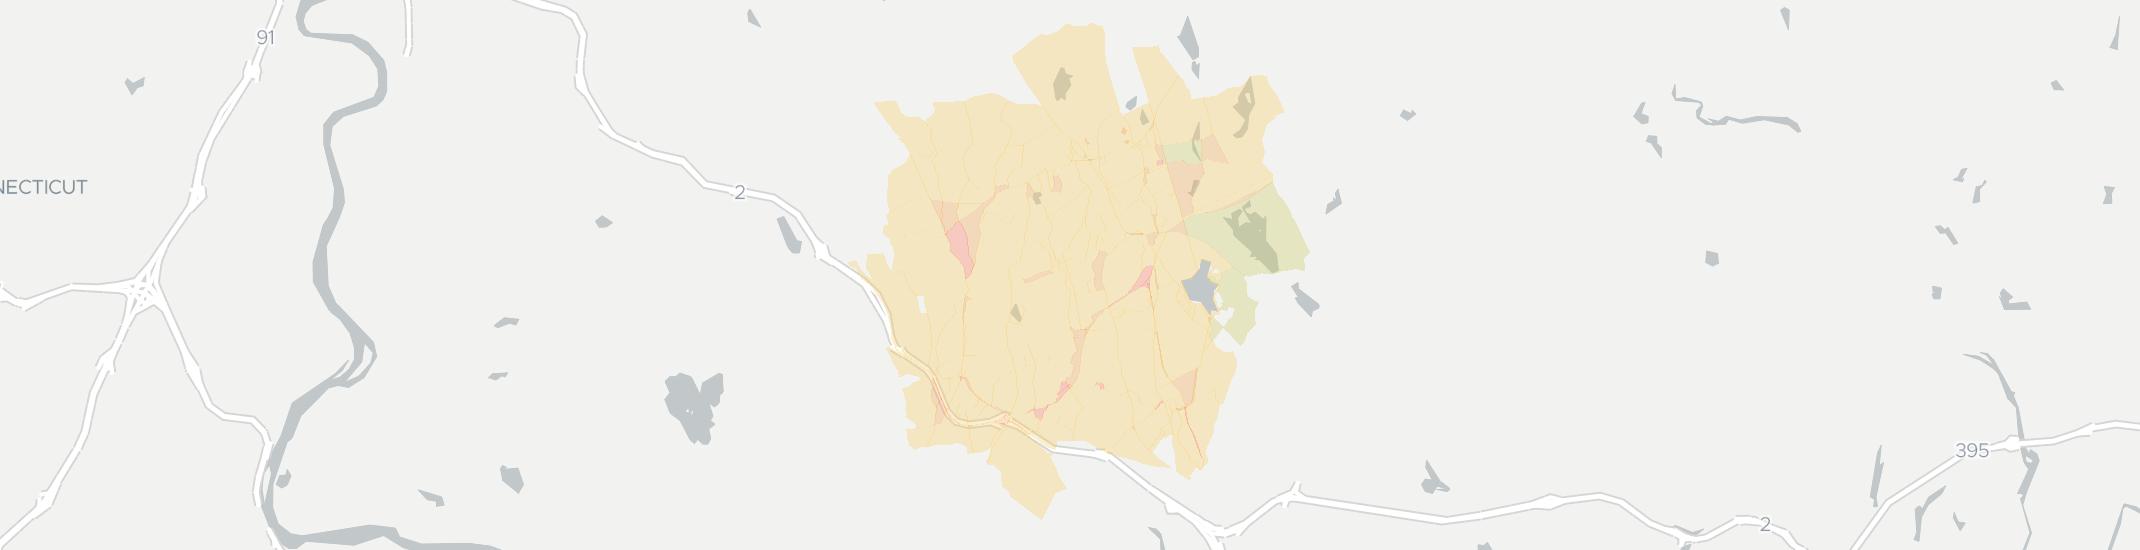 Amston Internet Competition Map. Click for interactive map.